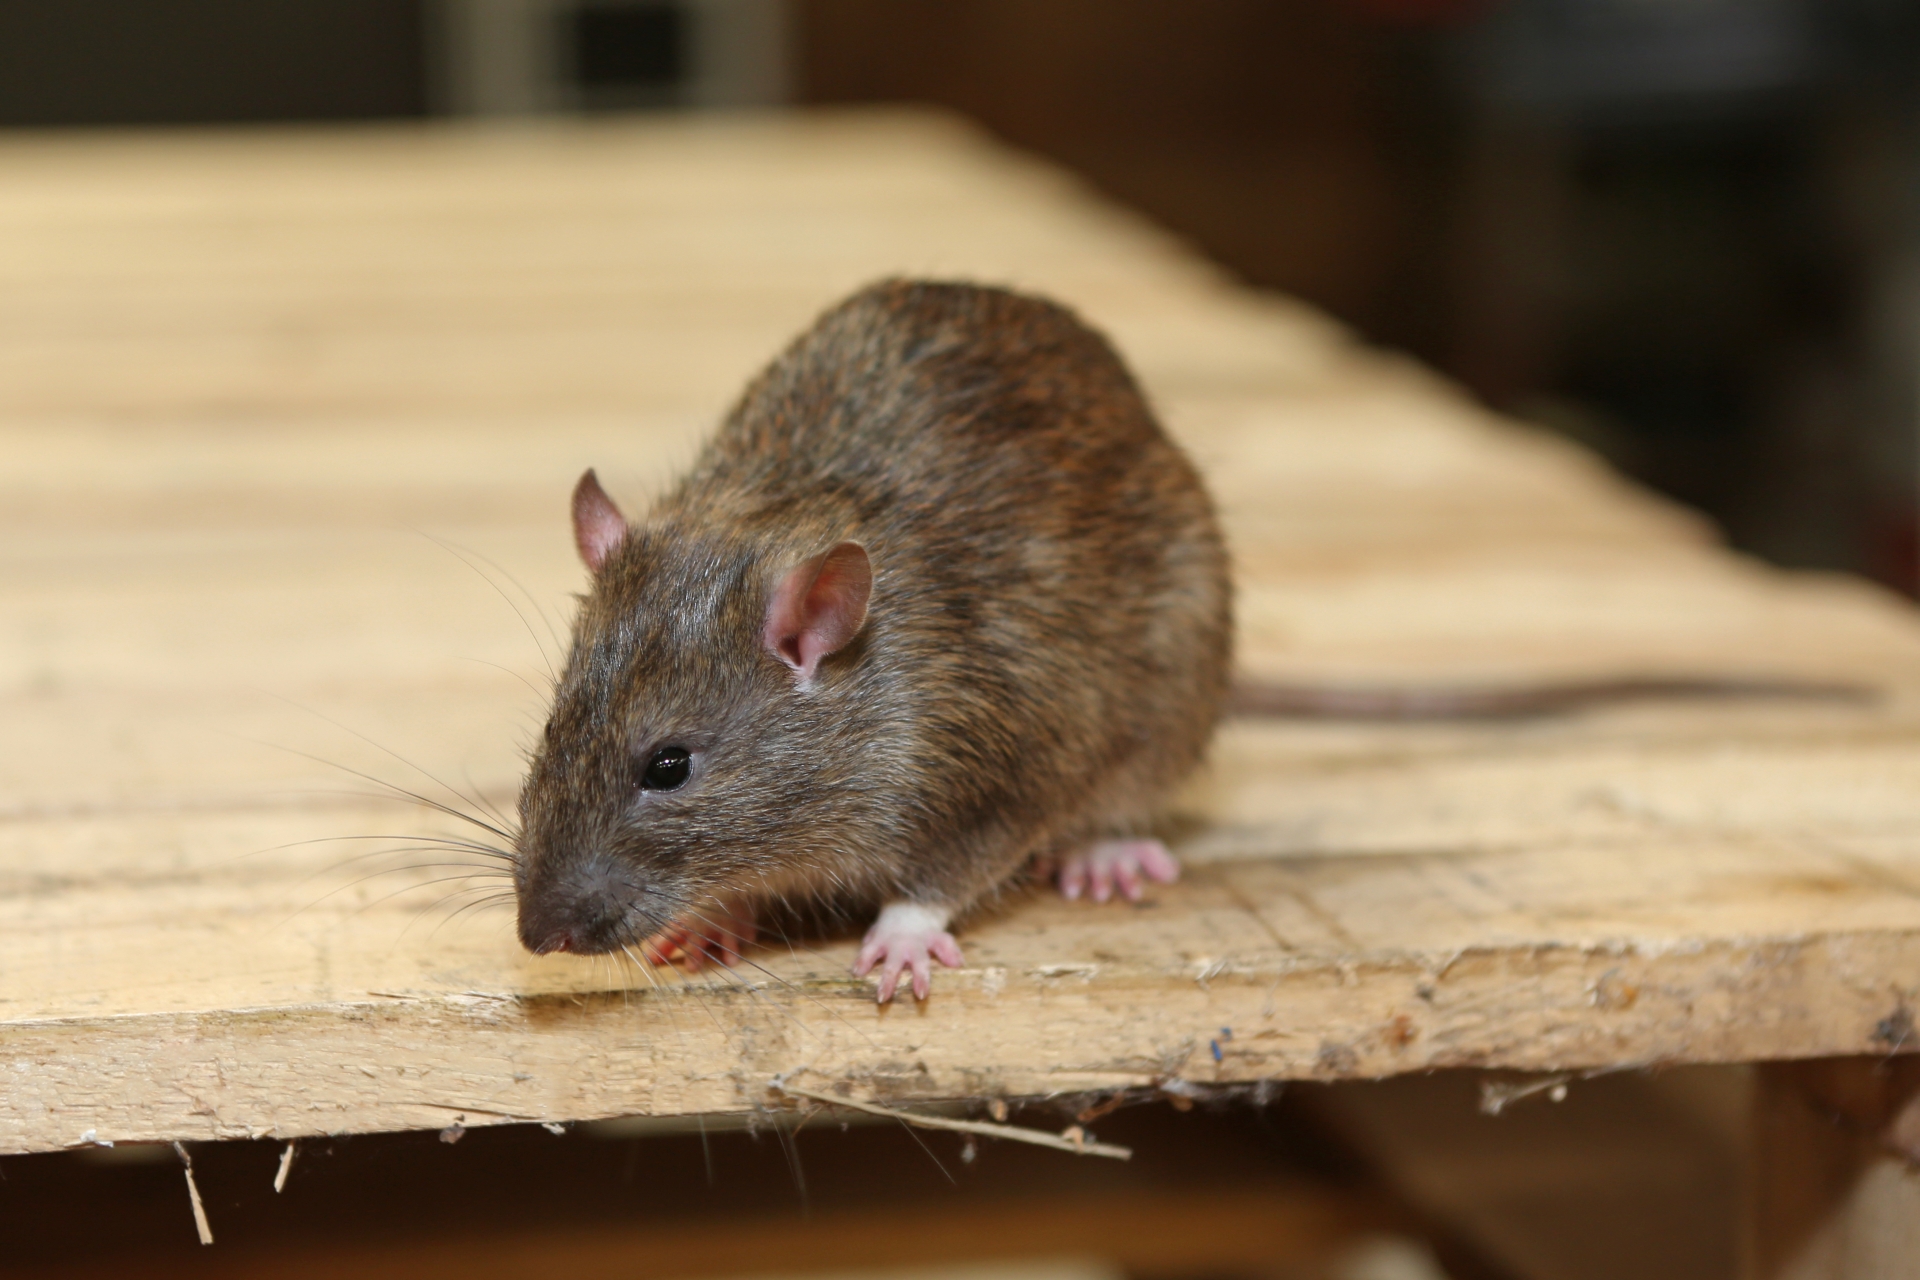 Rat extermination, Pest Control in South Woodford, E18. Call Now 020 8166 9746